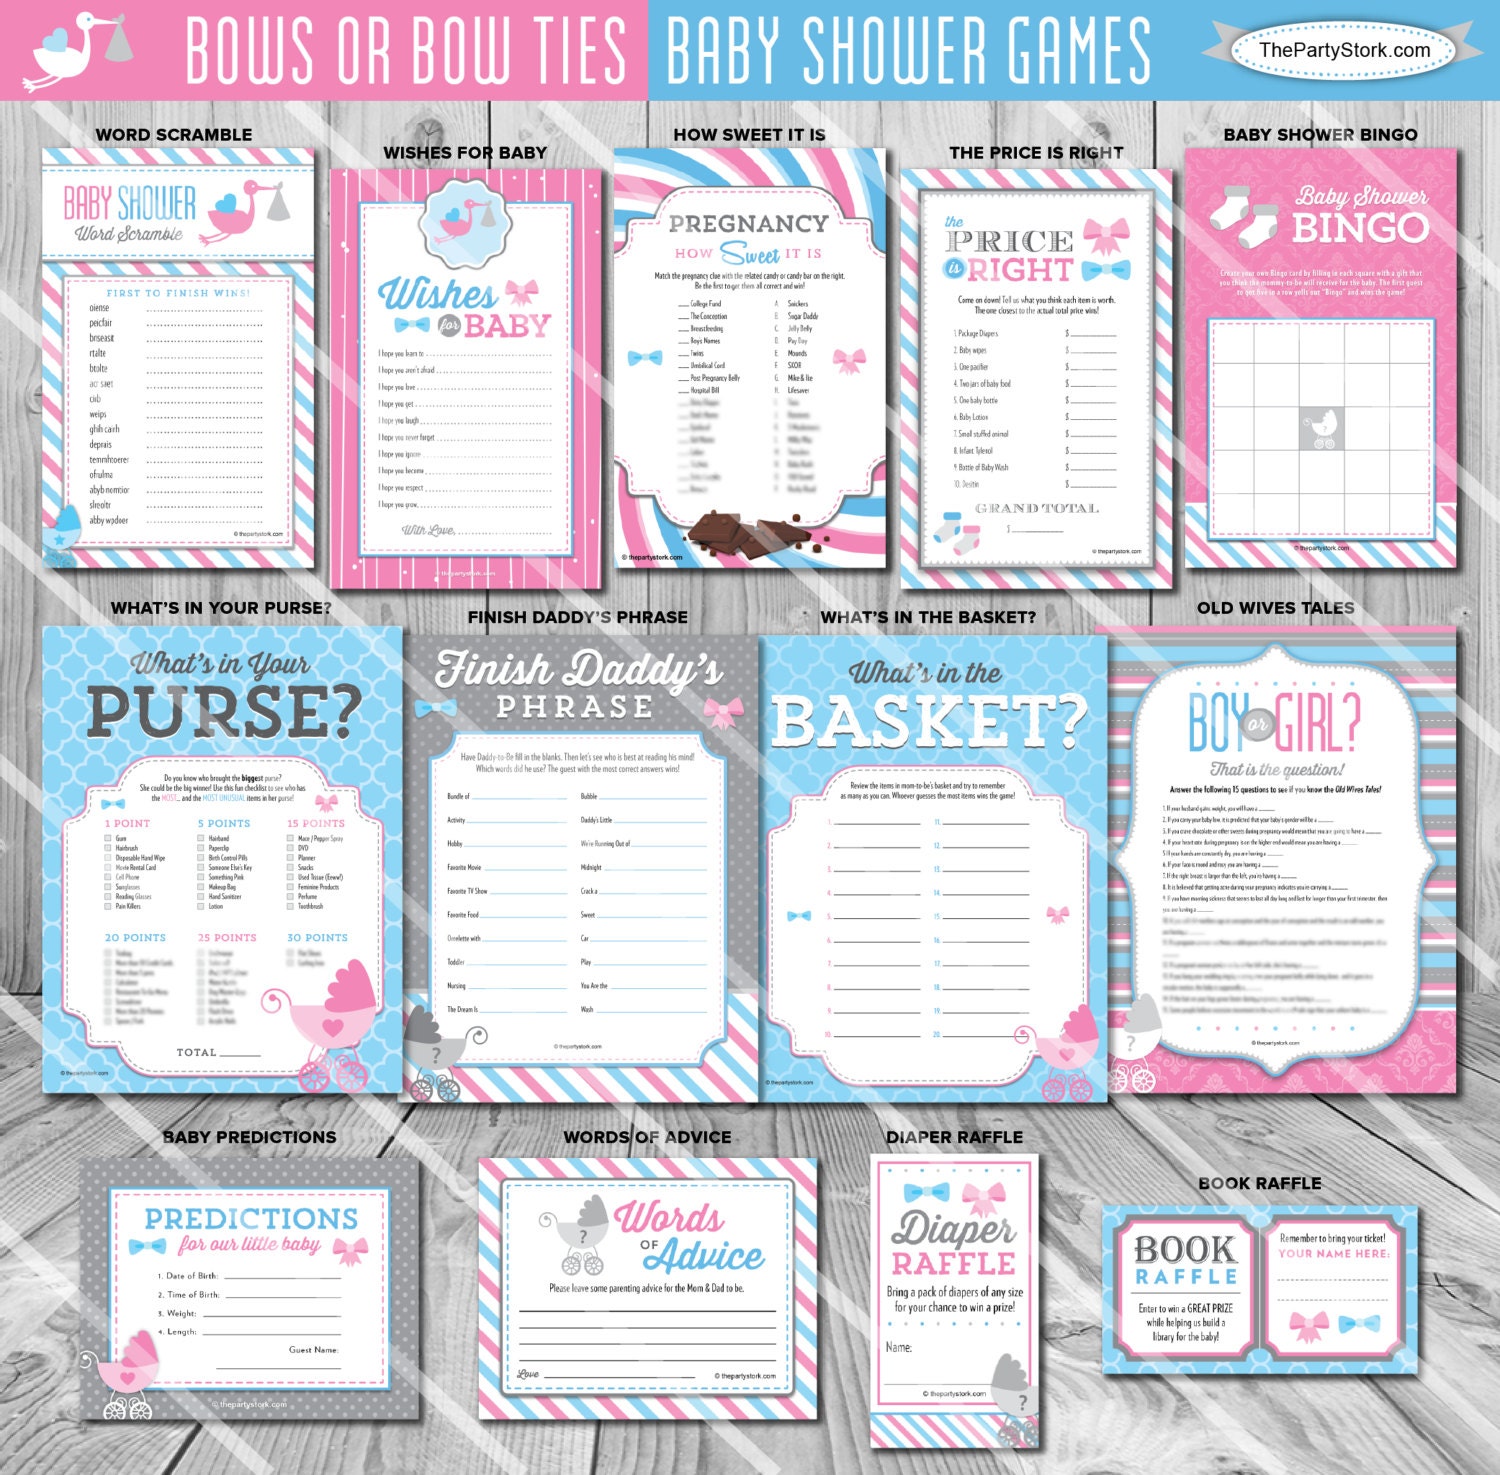 15. Gender Reveal Party Games Bows or Bowties Baby Shower.